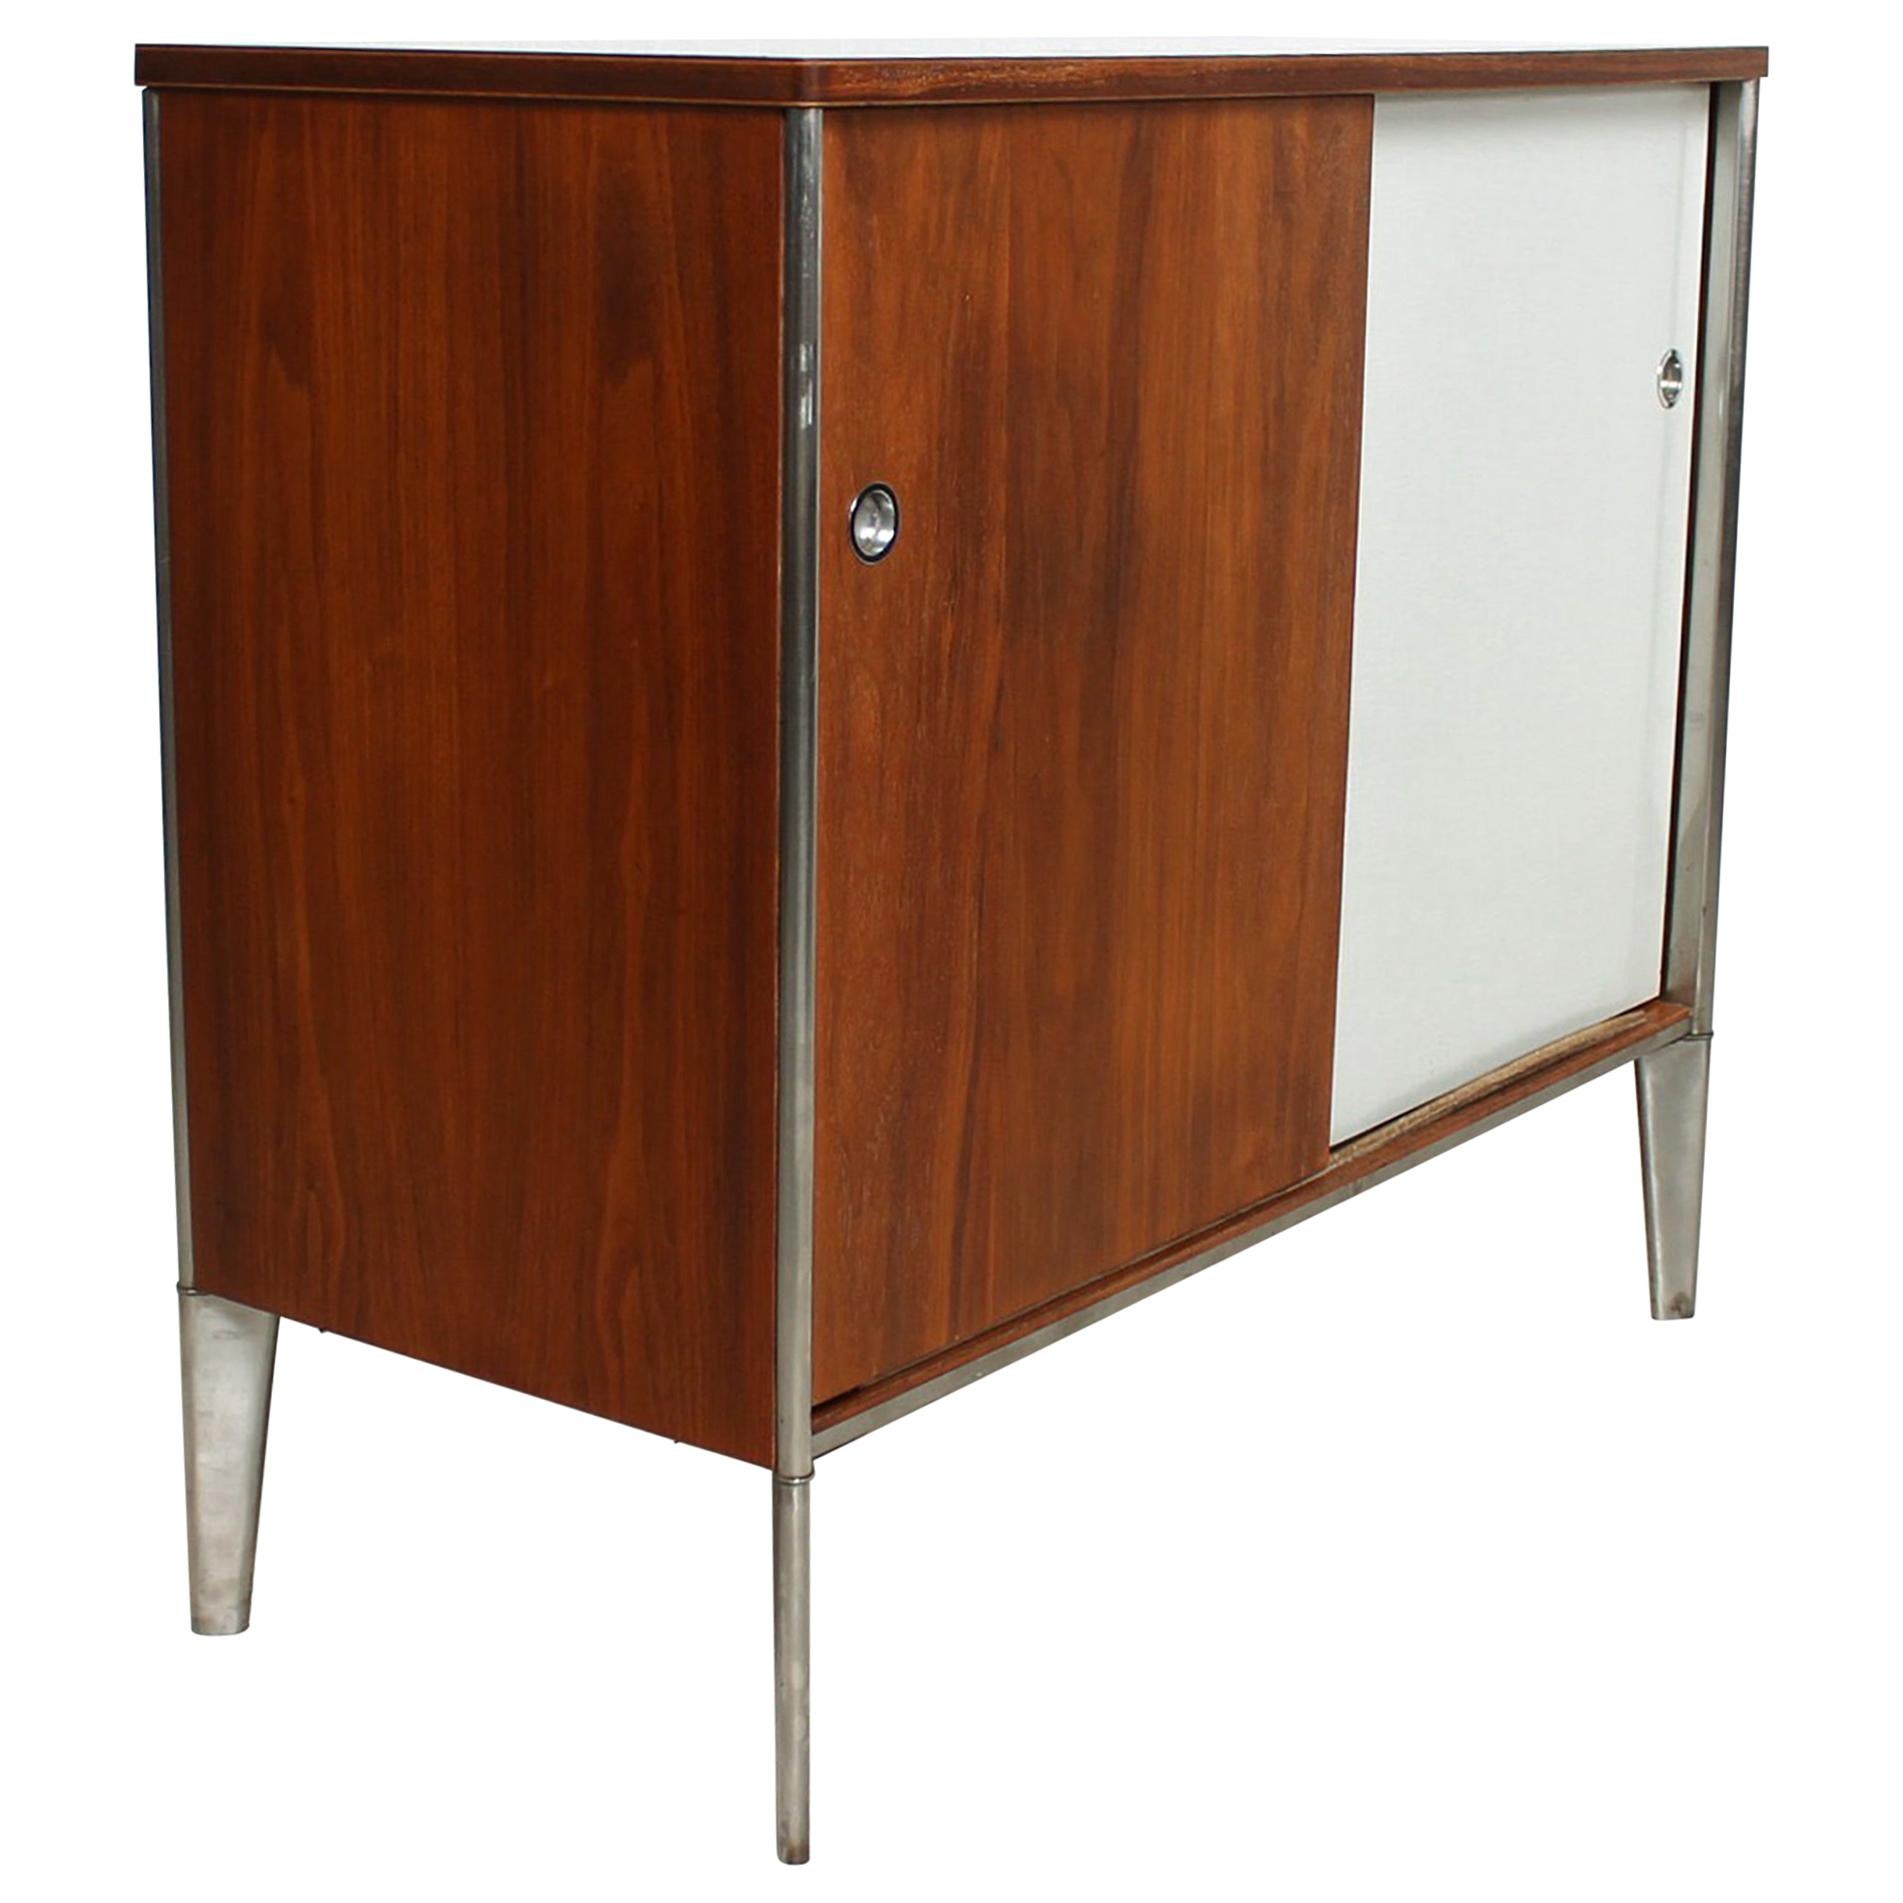 Modern Industrial Storage Cabinet by Raymond Loewy for Hill-Rom USA 1950s